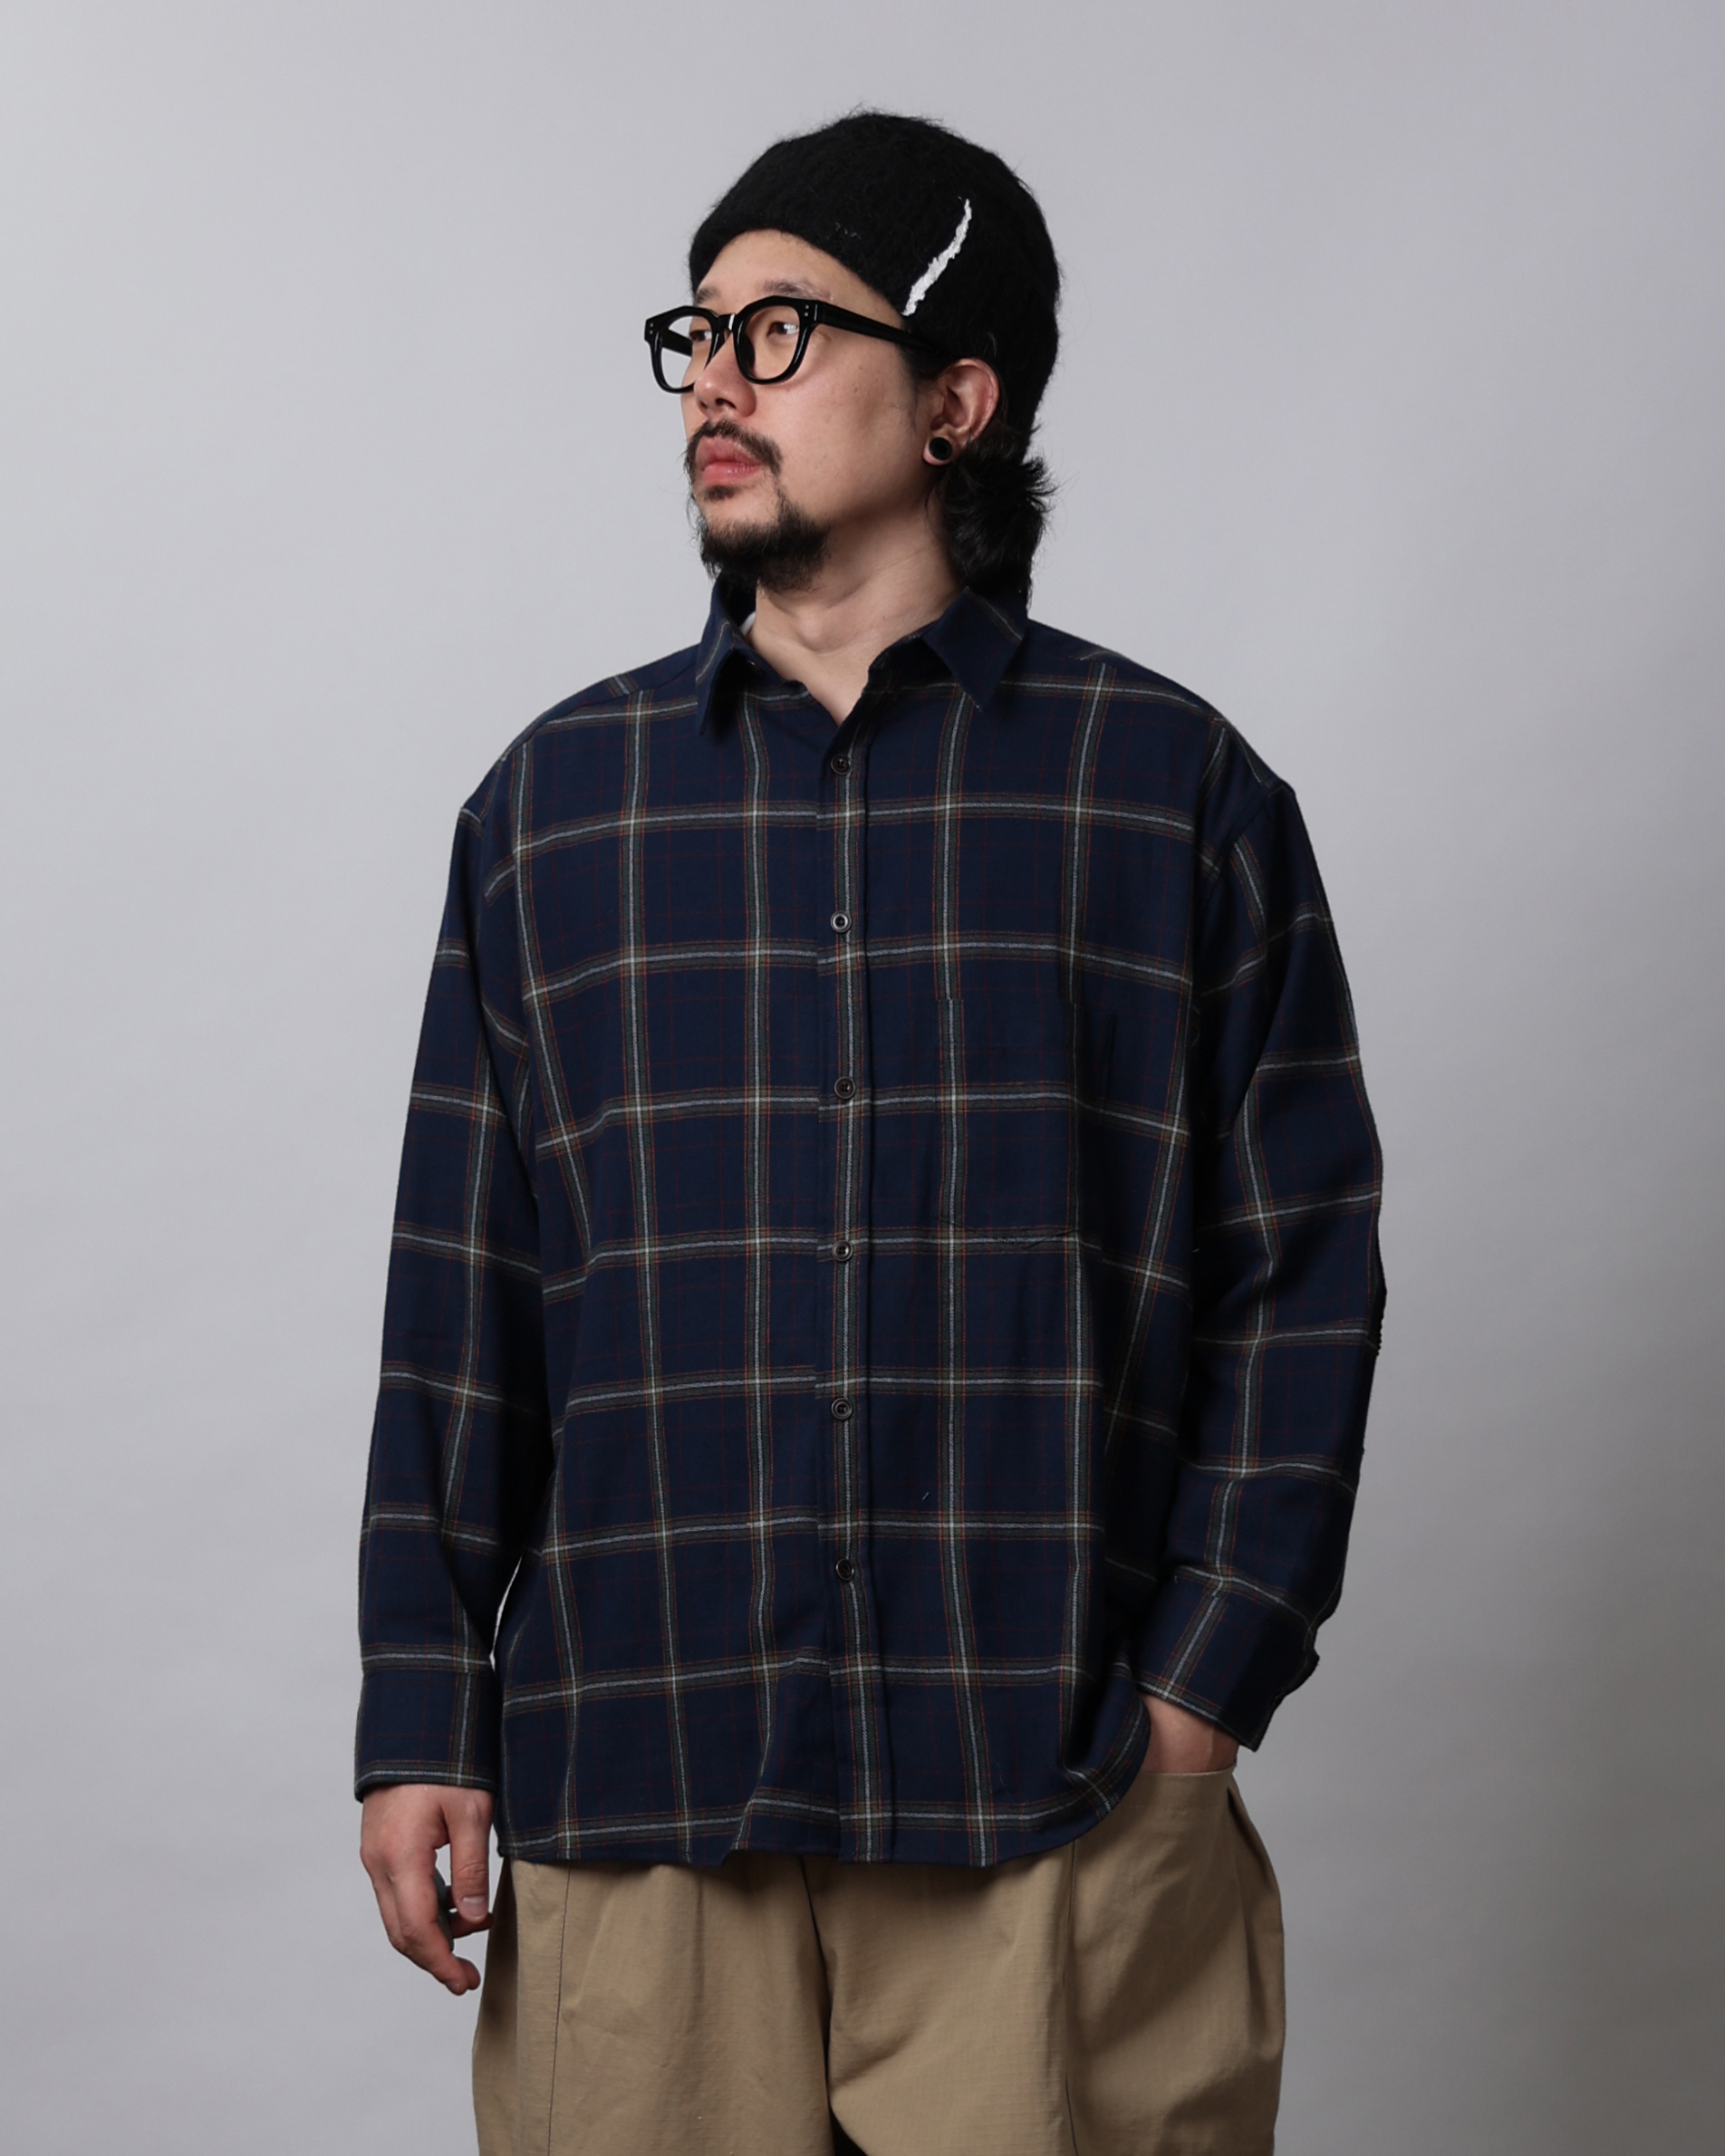 LIBERT RAY Patched Over Check Shirts (Navy/Green/Camel/Brown/Olive/Beige) - 10차 리오더 (올리브 4/1 배송예정)